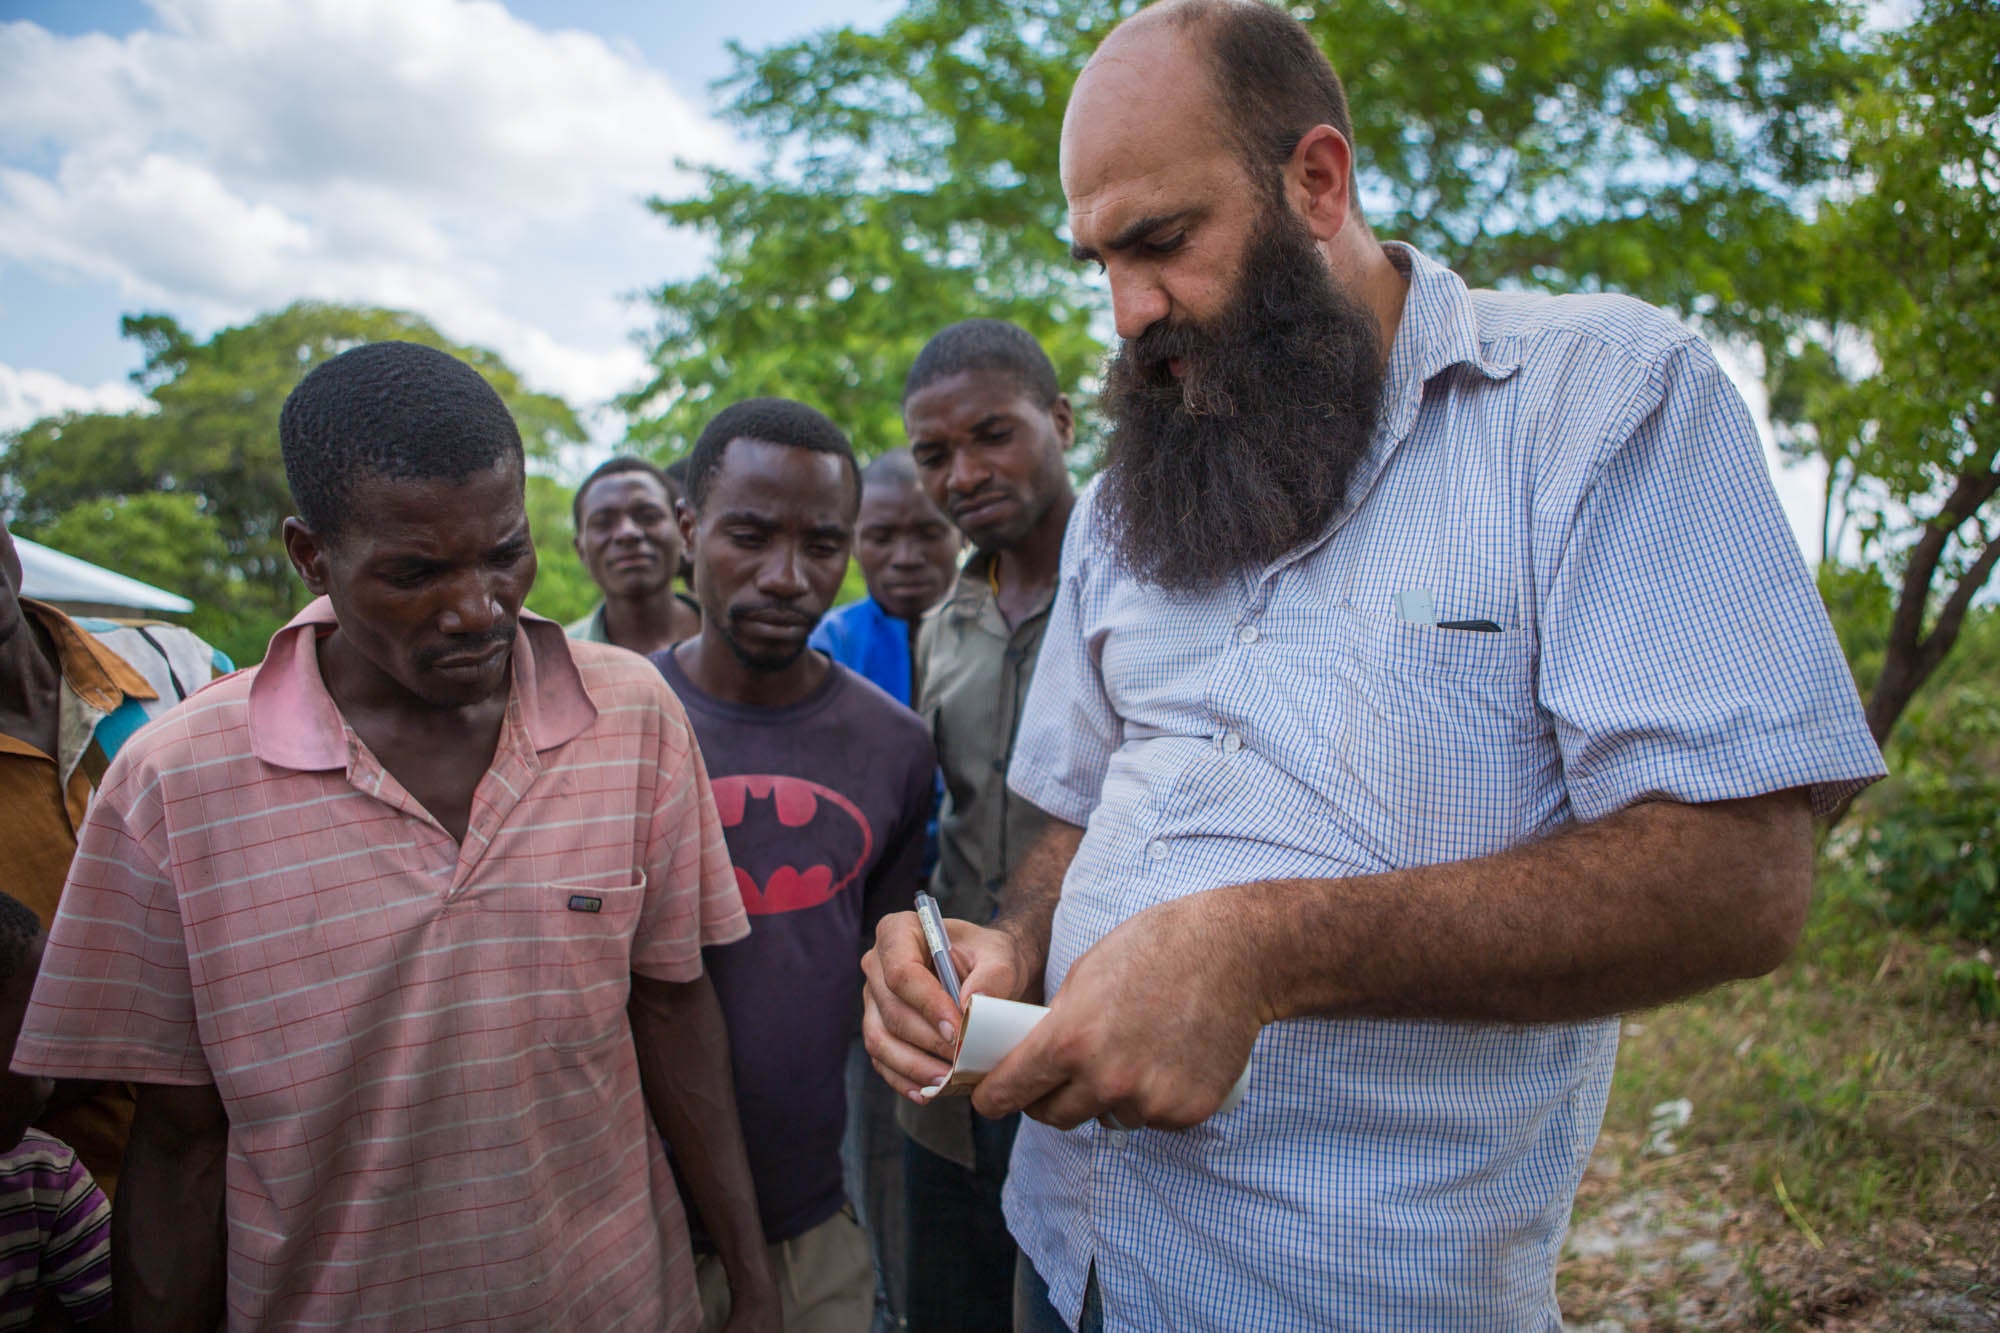 André, a Lebanese-American organic farmer from Boulder, speaking with a group of organic, fair trade Zambian beekeepers